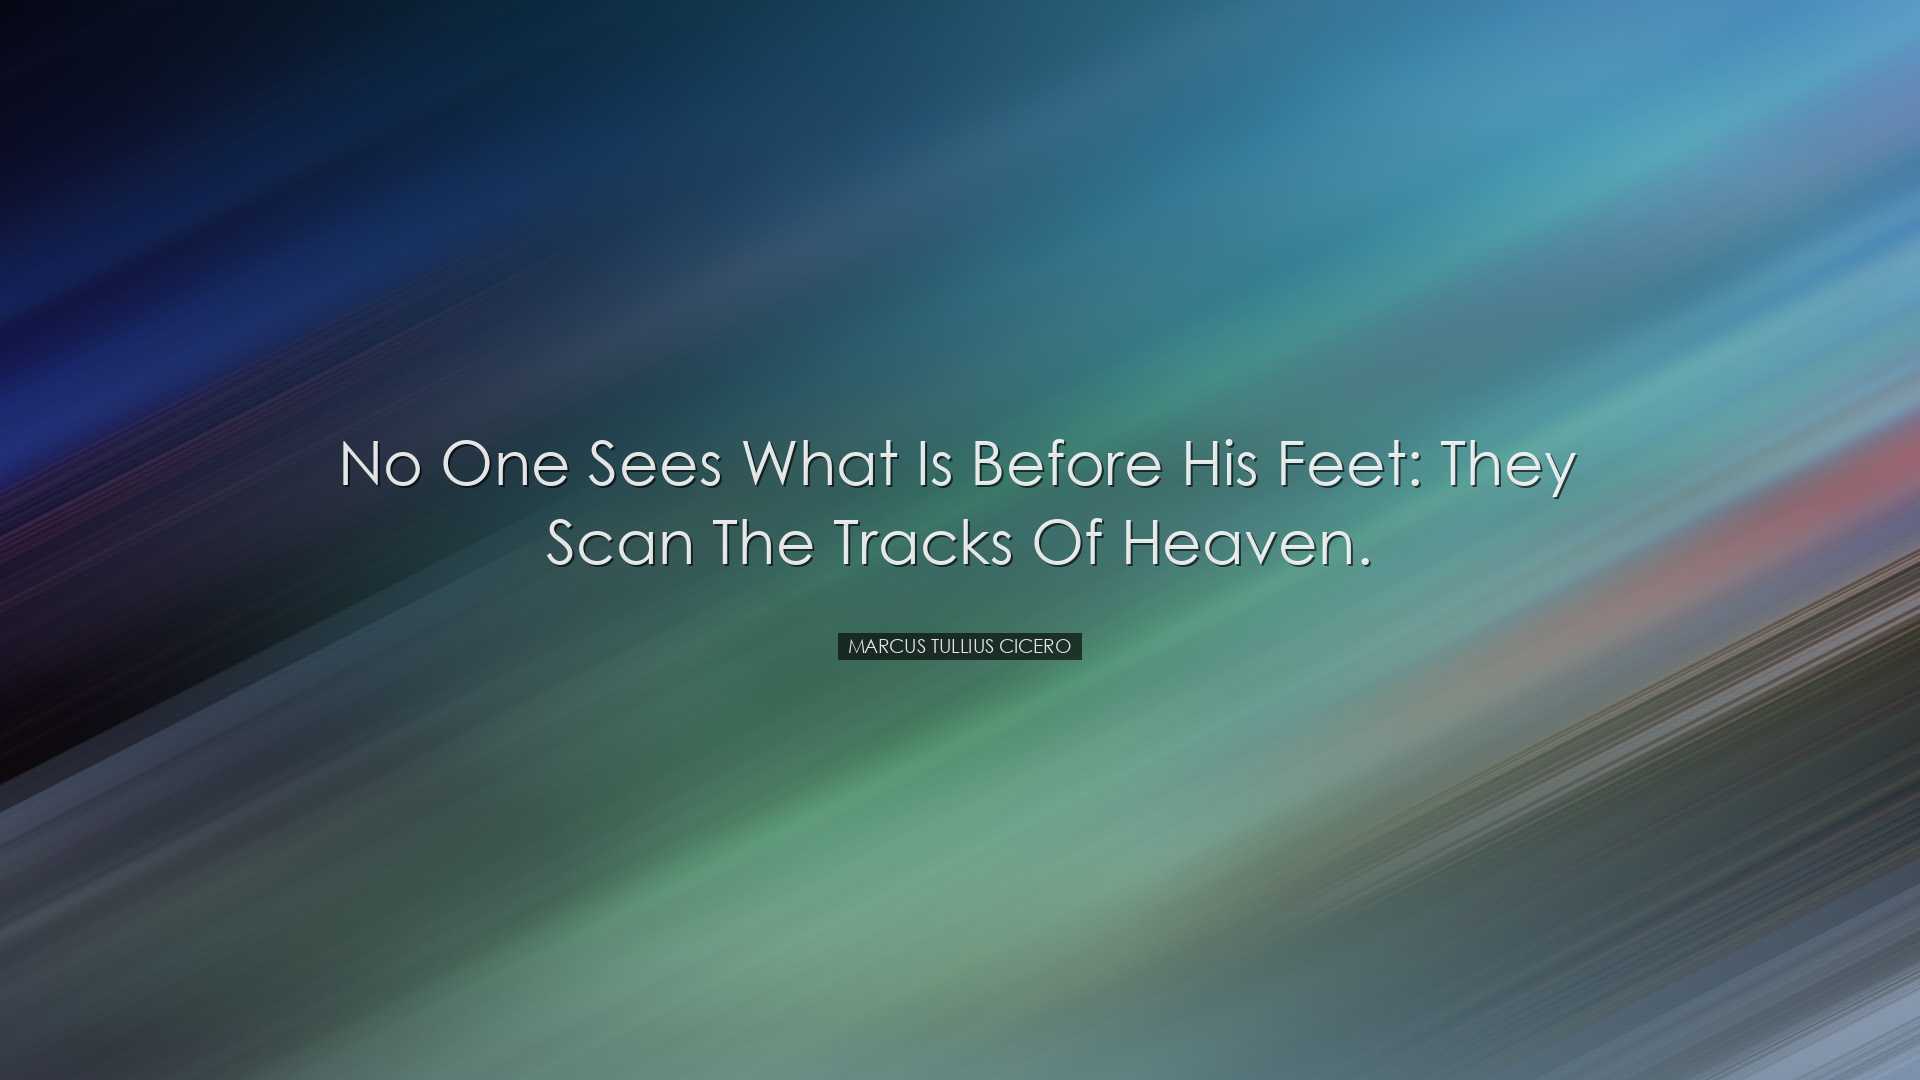 No one sees what is before his feet: they scan the tracks of heave